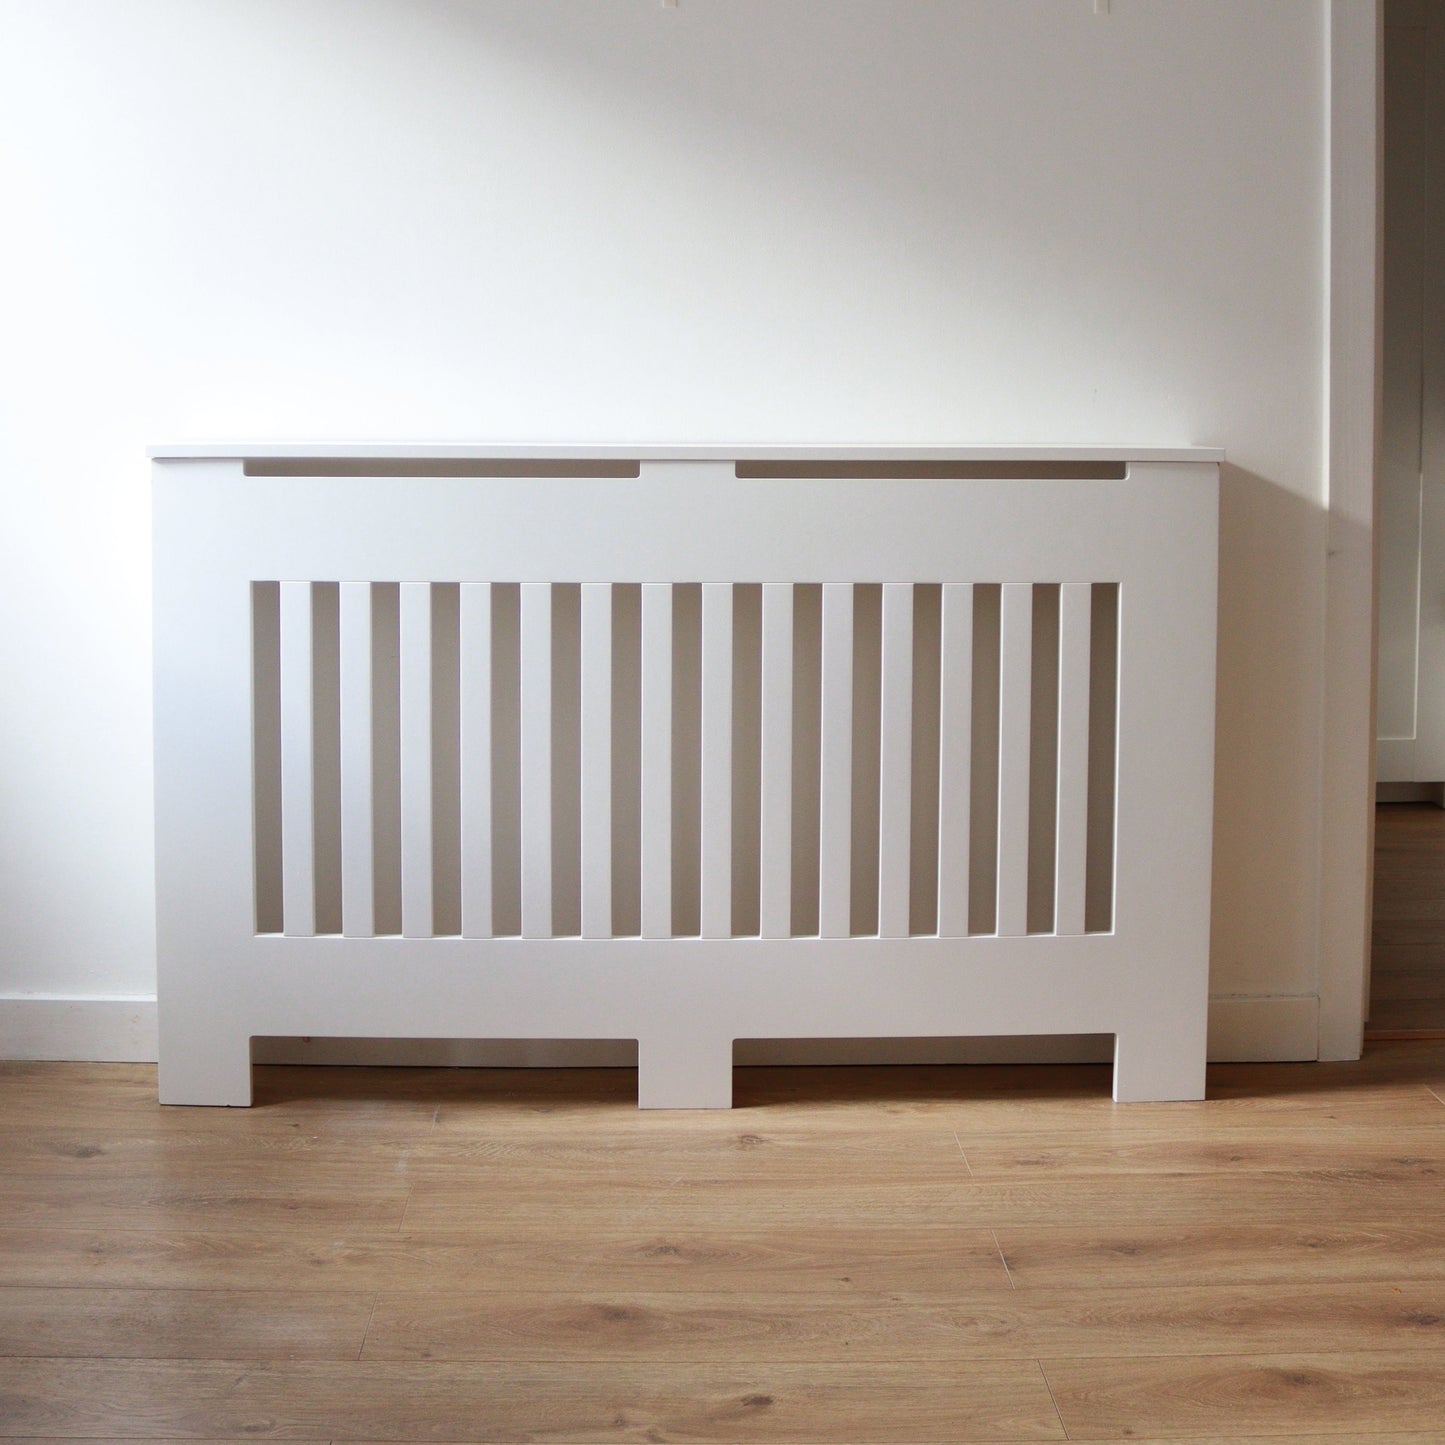 Custom Sized Radiator Cover: Wide Vertical Slats - 120 cm by 20 cm by 100 cm